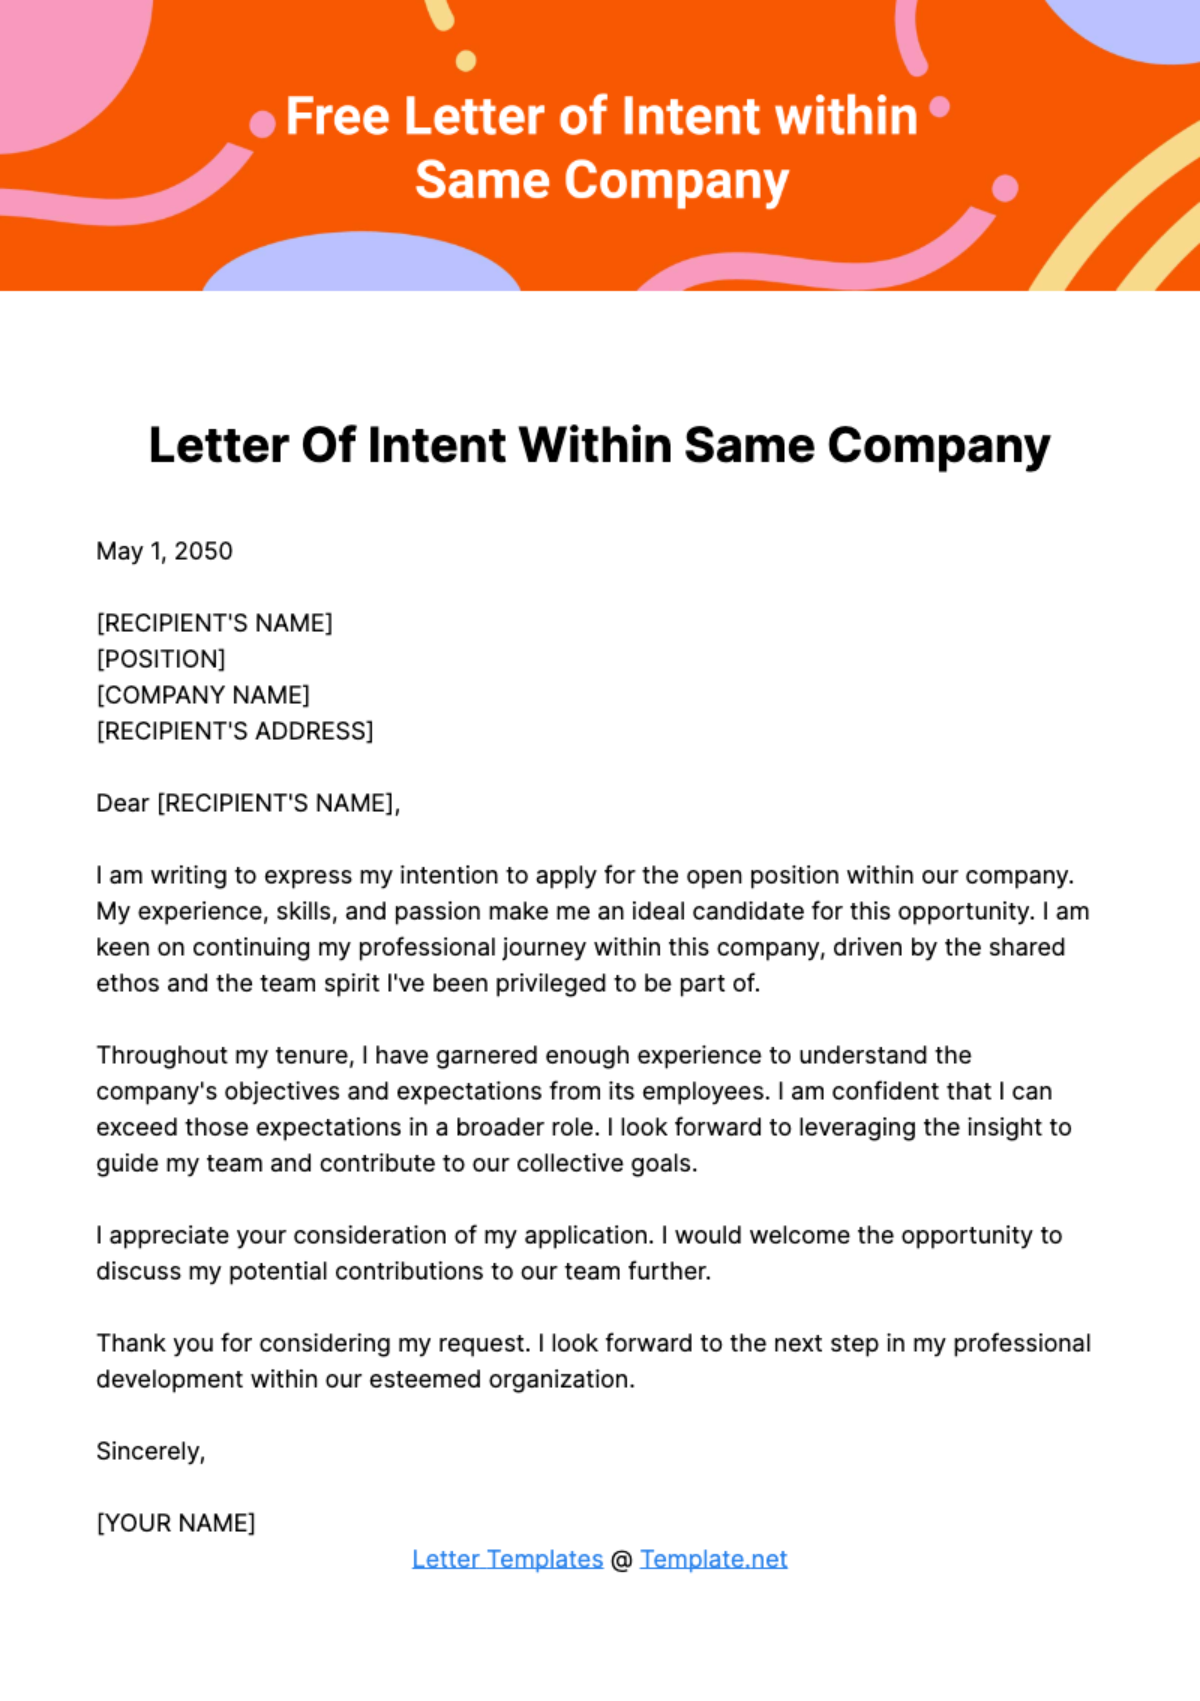 Free Letter of Intent within Same Company Template